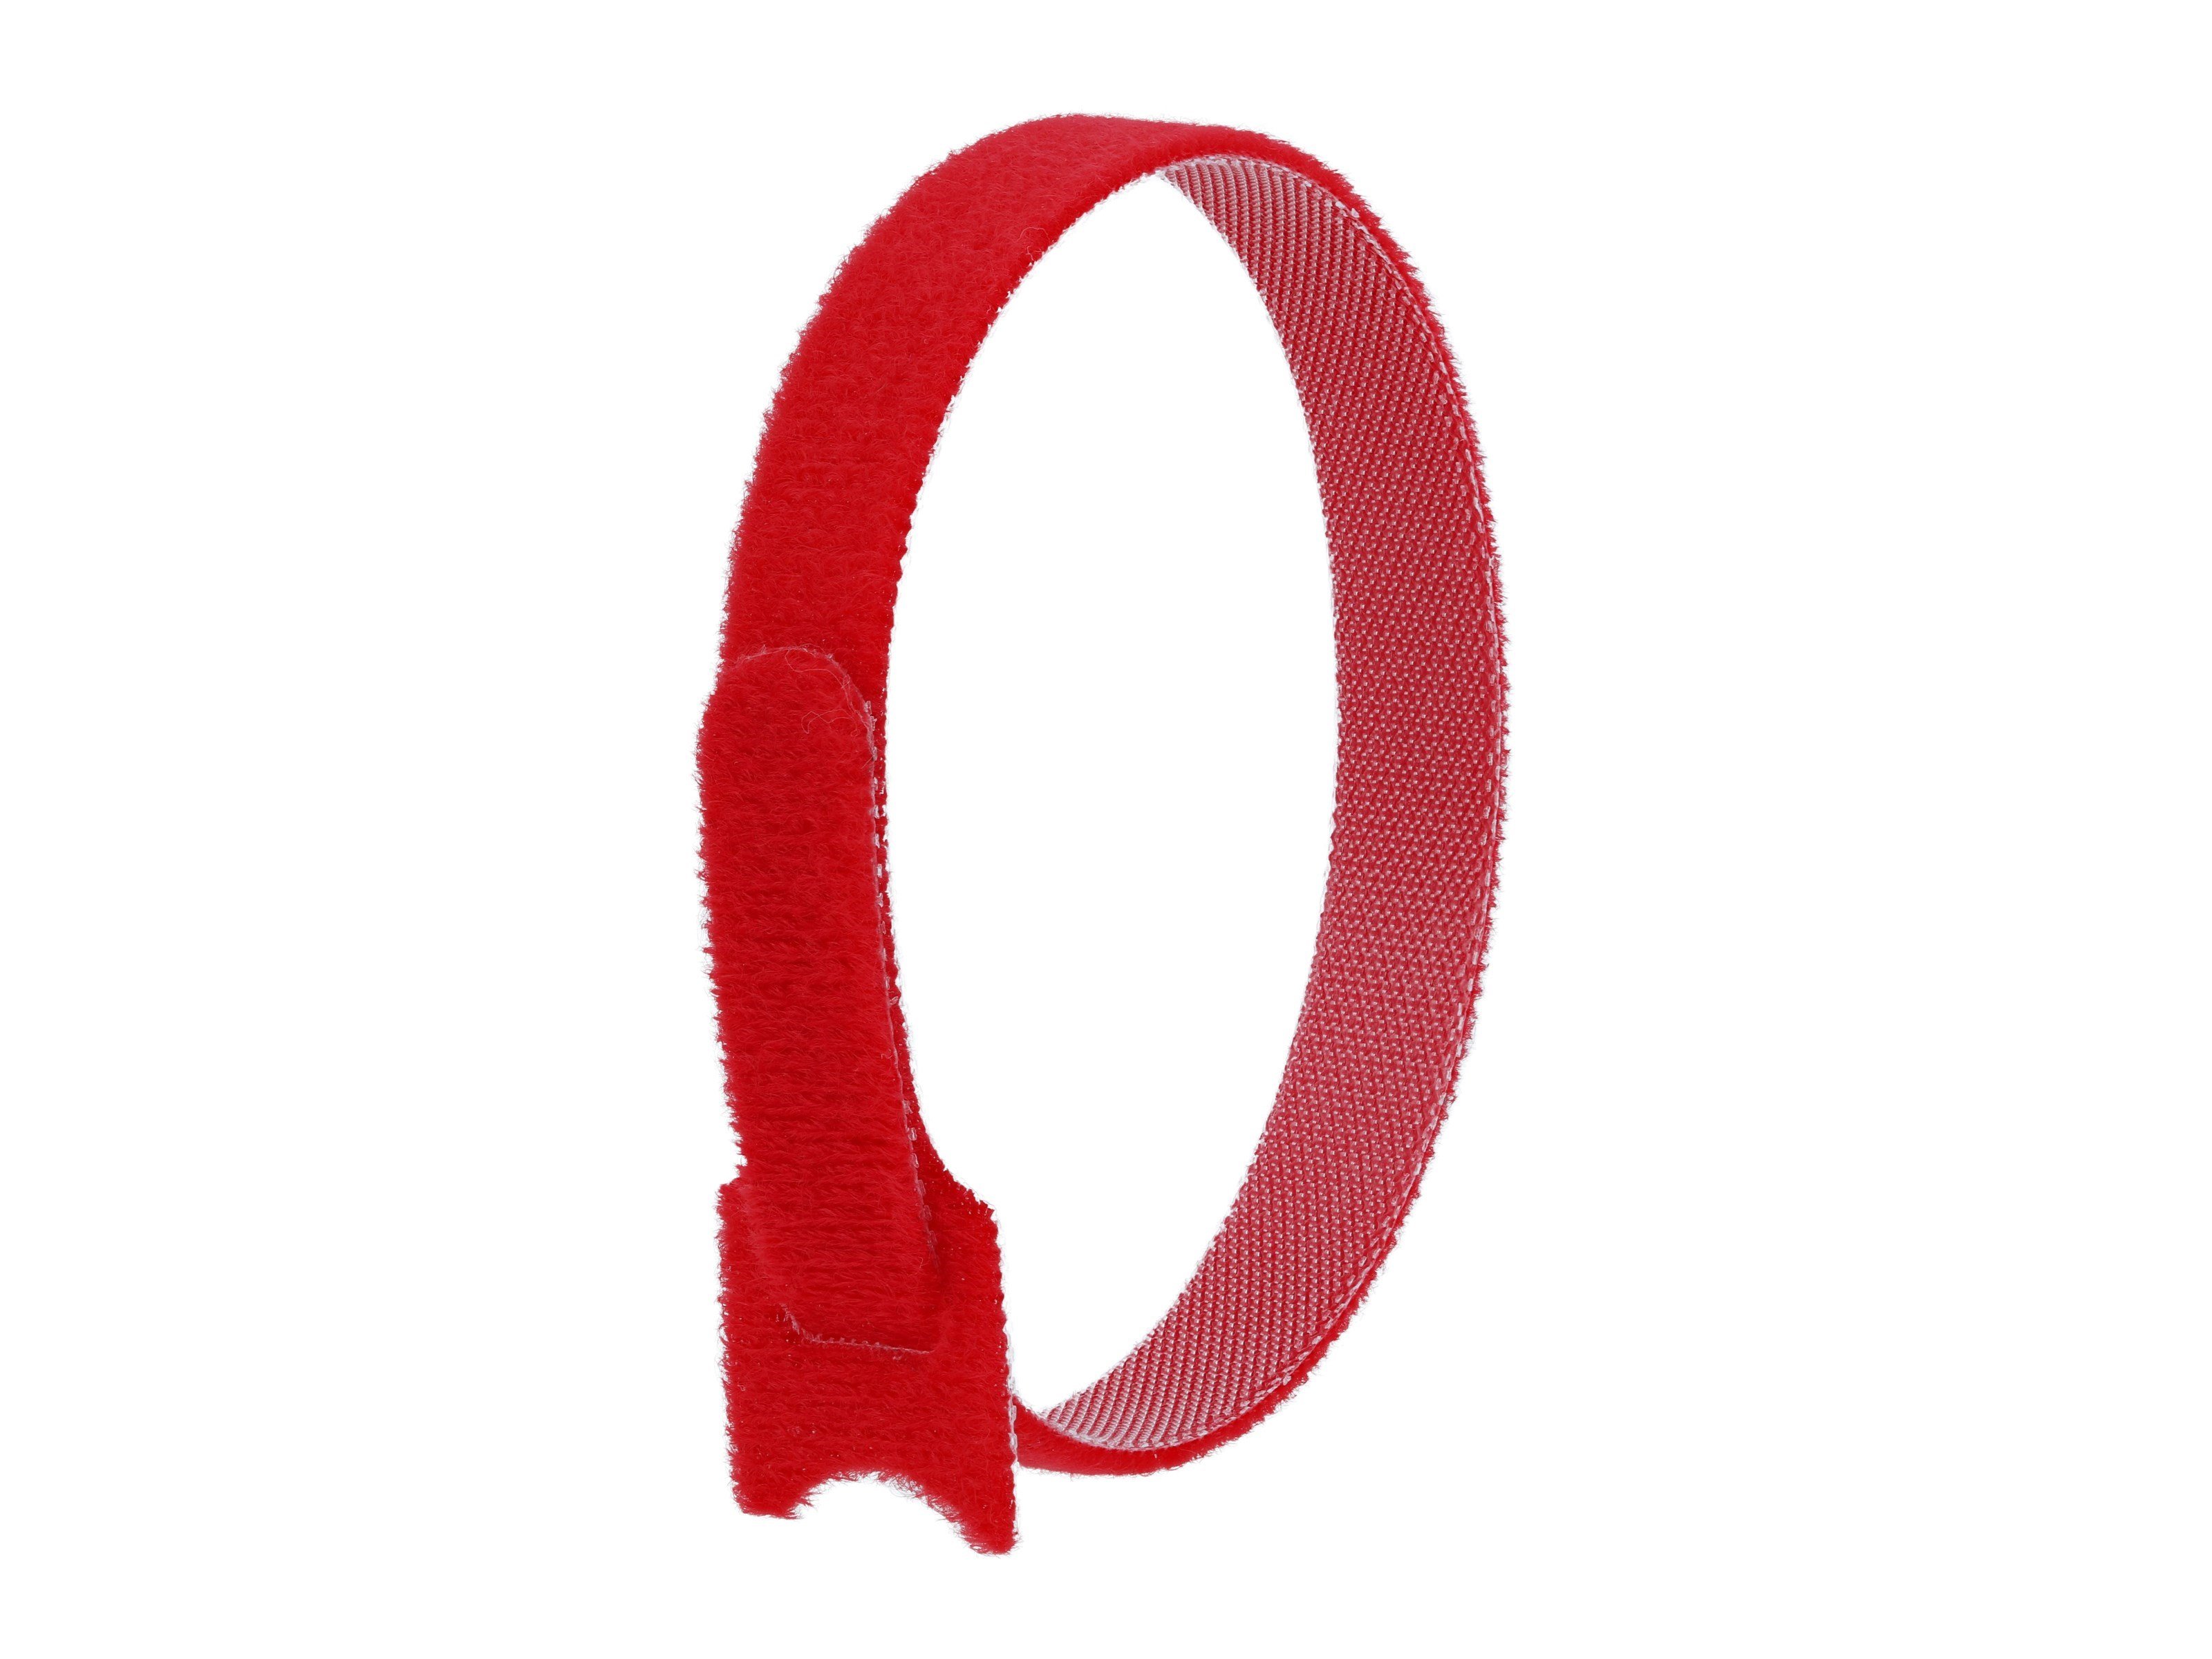 12 Inch Red Reuseable Tie Wrap - 50 Pack - Secure™ Cable Ties